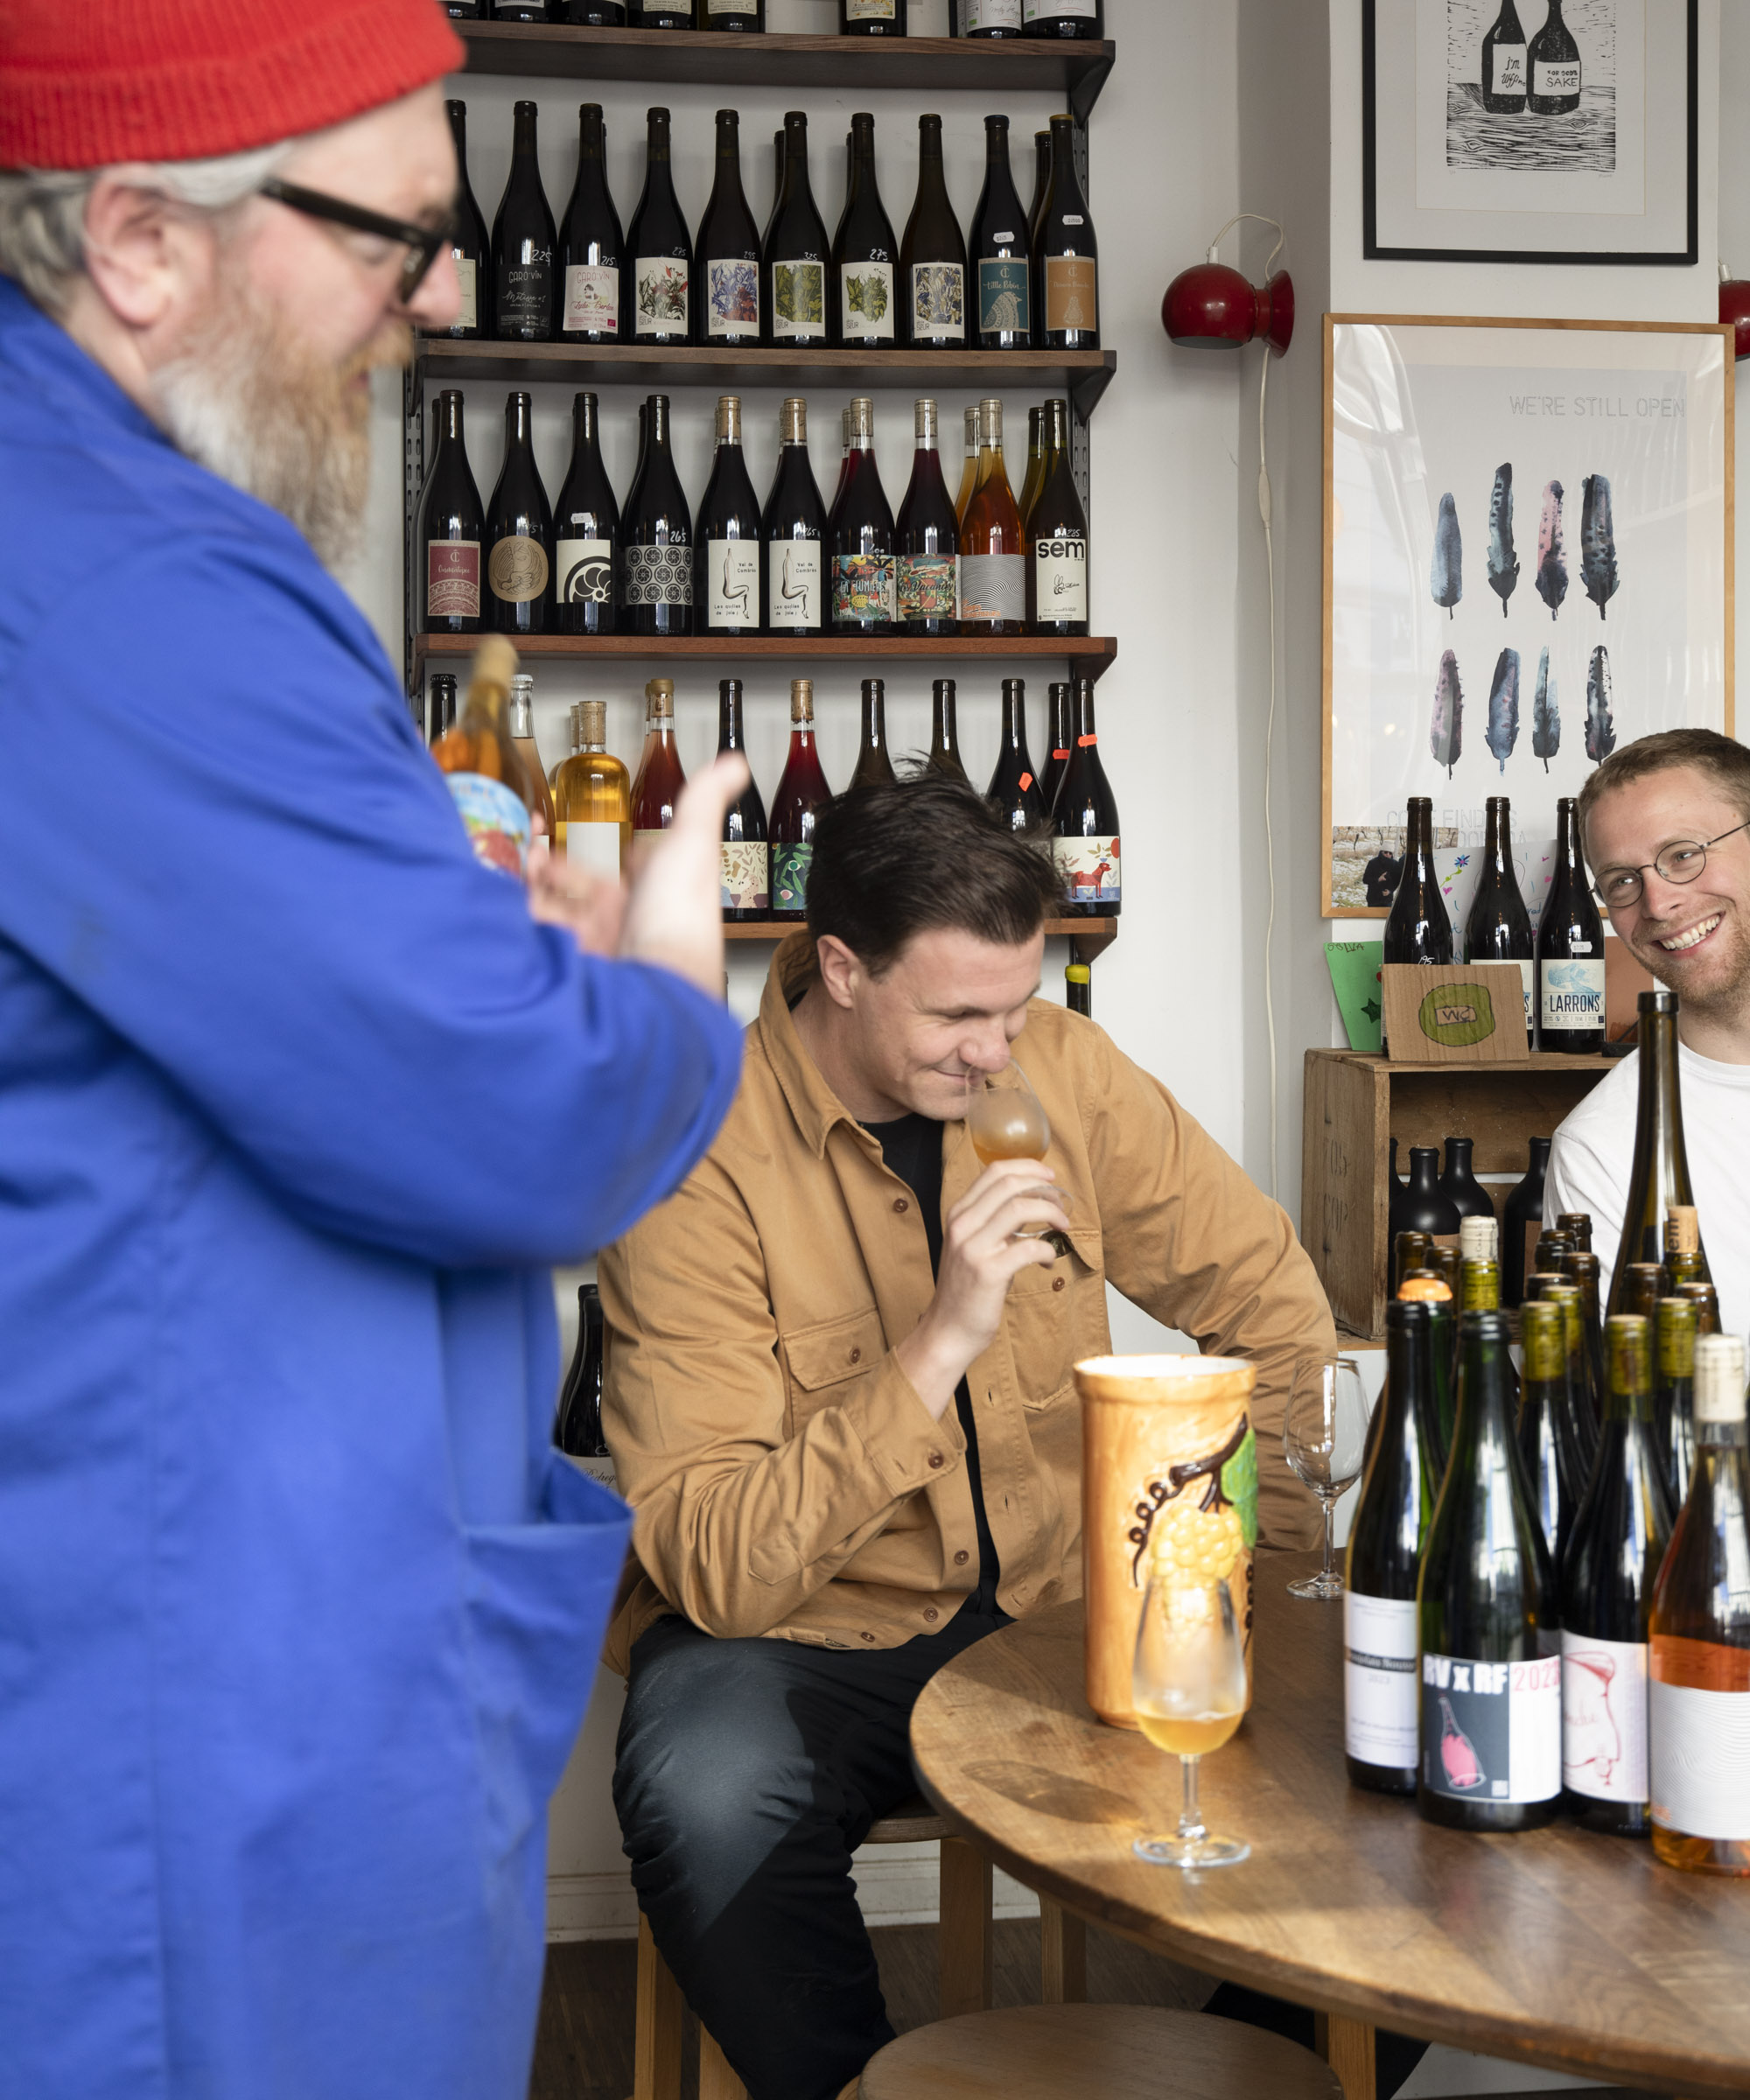 Pick whatever you like at Rødder & Vin Boutique in Nørrebro – Buy incredible bottles of wine from one of the best importers in the business and enjoy them on the spot, at home, or lakeside at Dronning Louises Bro